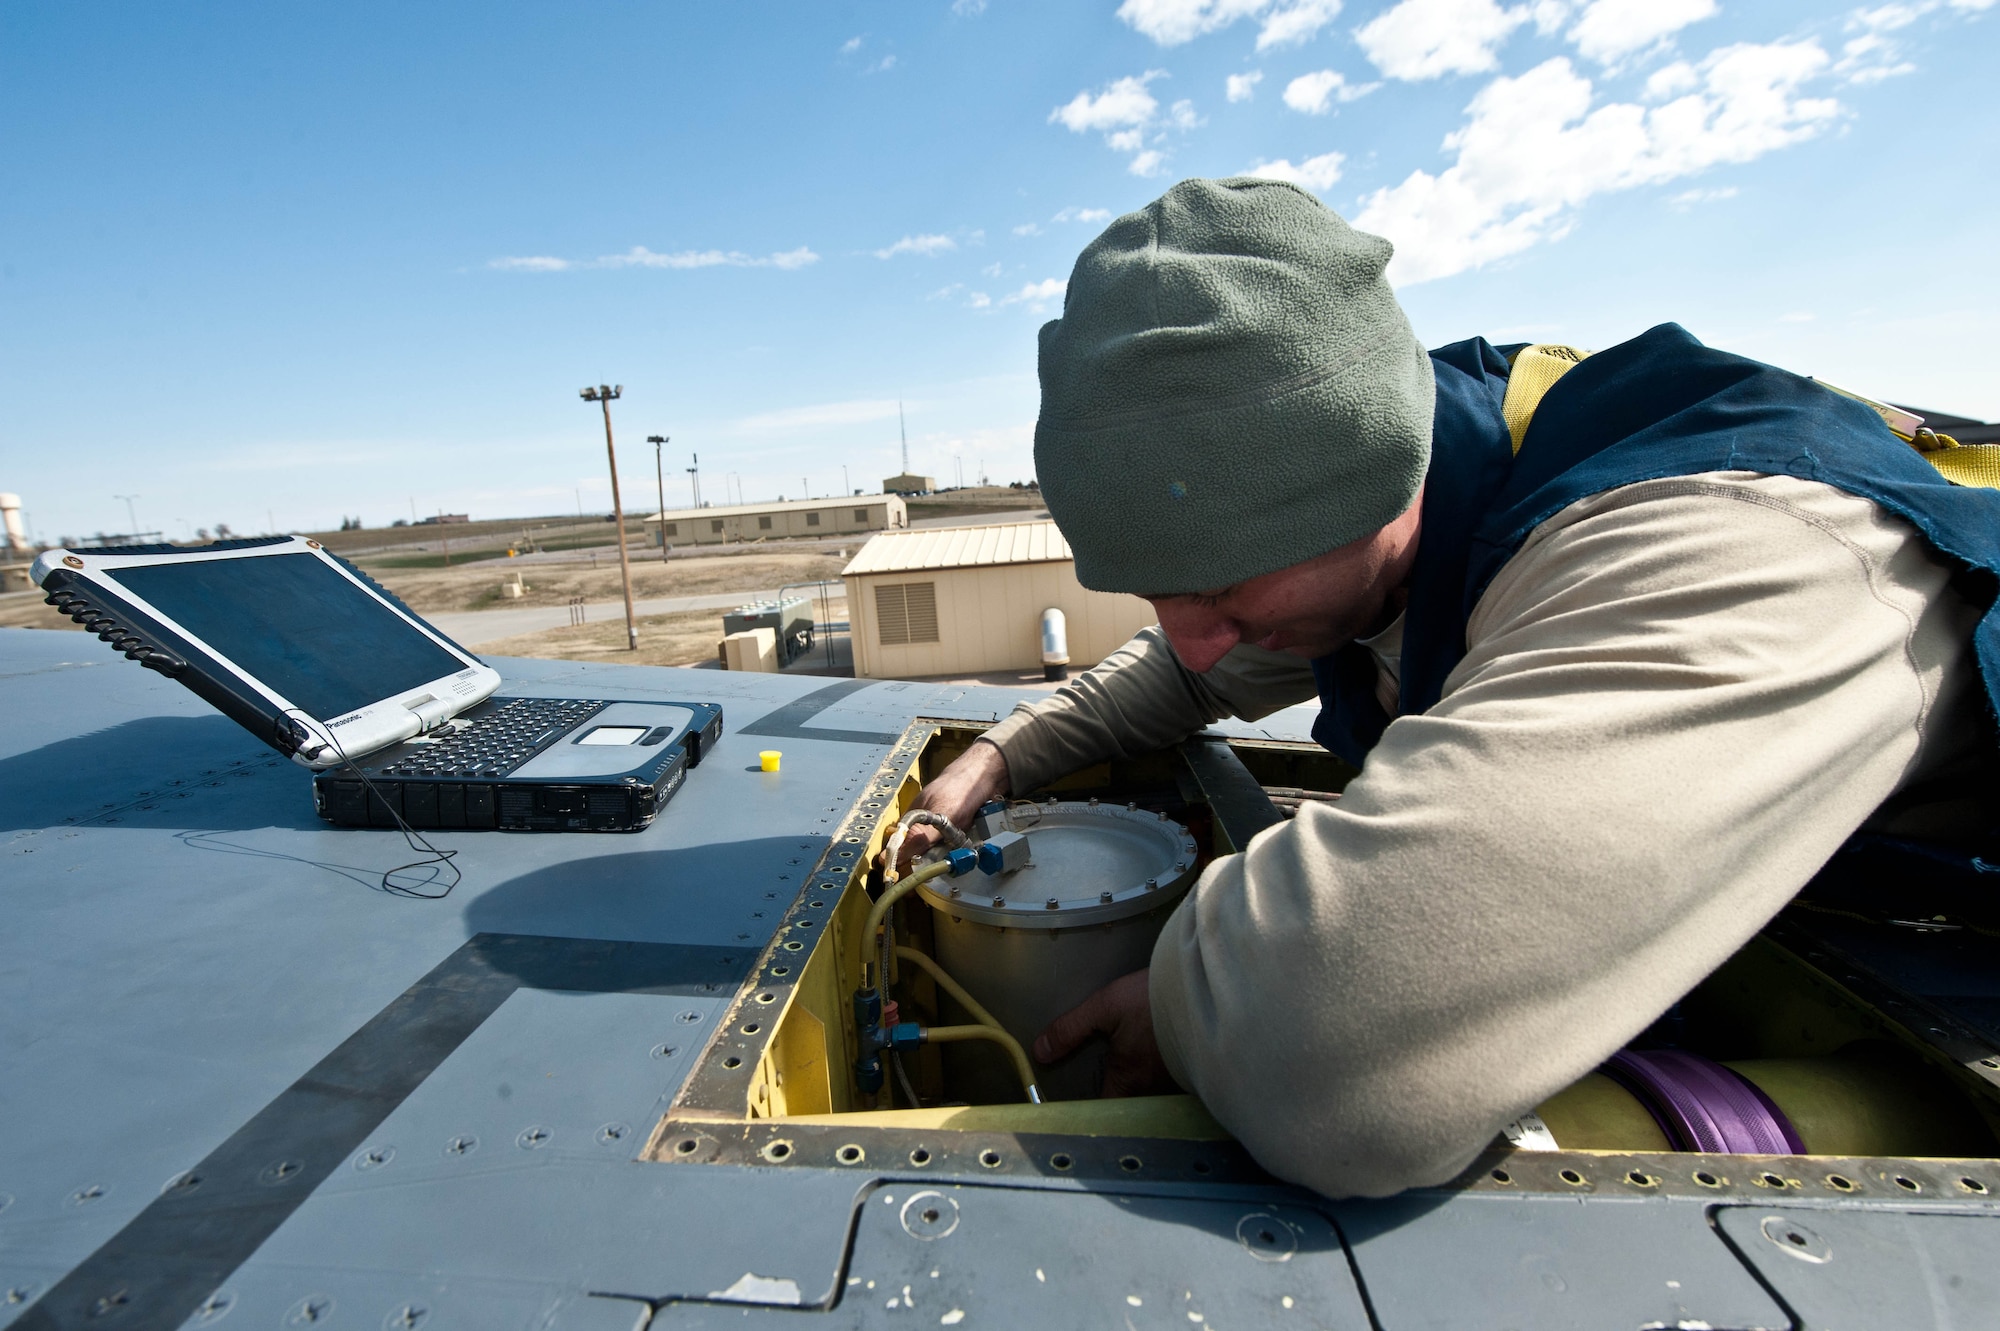 Staff Sgt. Thomas Gillan, 28th Aircraft Maintenance Squadron electrical and environmental lead technician, inspects electrical systems on top of a B-1 bomber at Ellsworth Air Force Base, S.D., April 4, 2013. Aircraft electrical and environmental systems specialists are one of six specialties in the 28th AMXS specialist section responsible for making sure the many systems of the B-1s at Ellsworth function properly. (U.S. Air Force photo by Airman 1st Class Zachary Hada/Released)